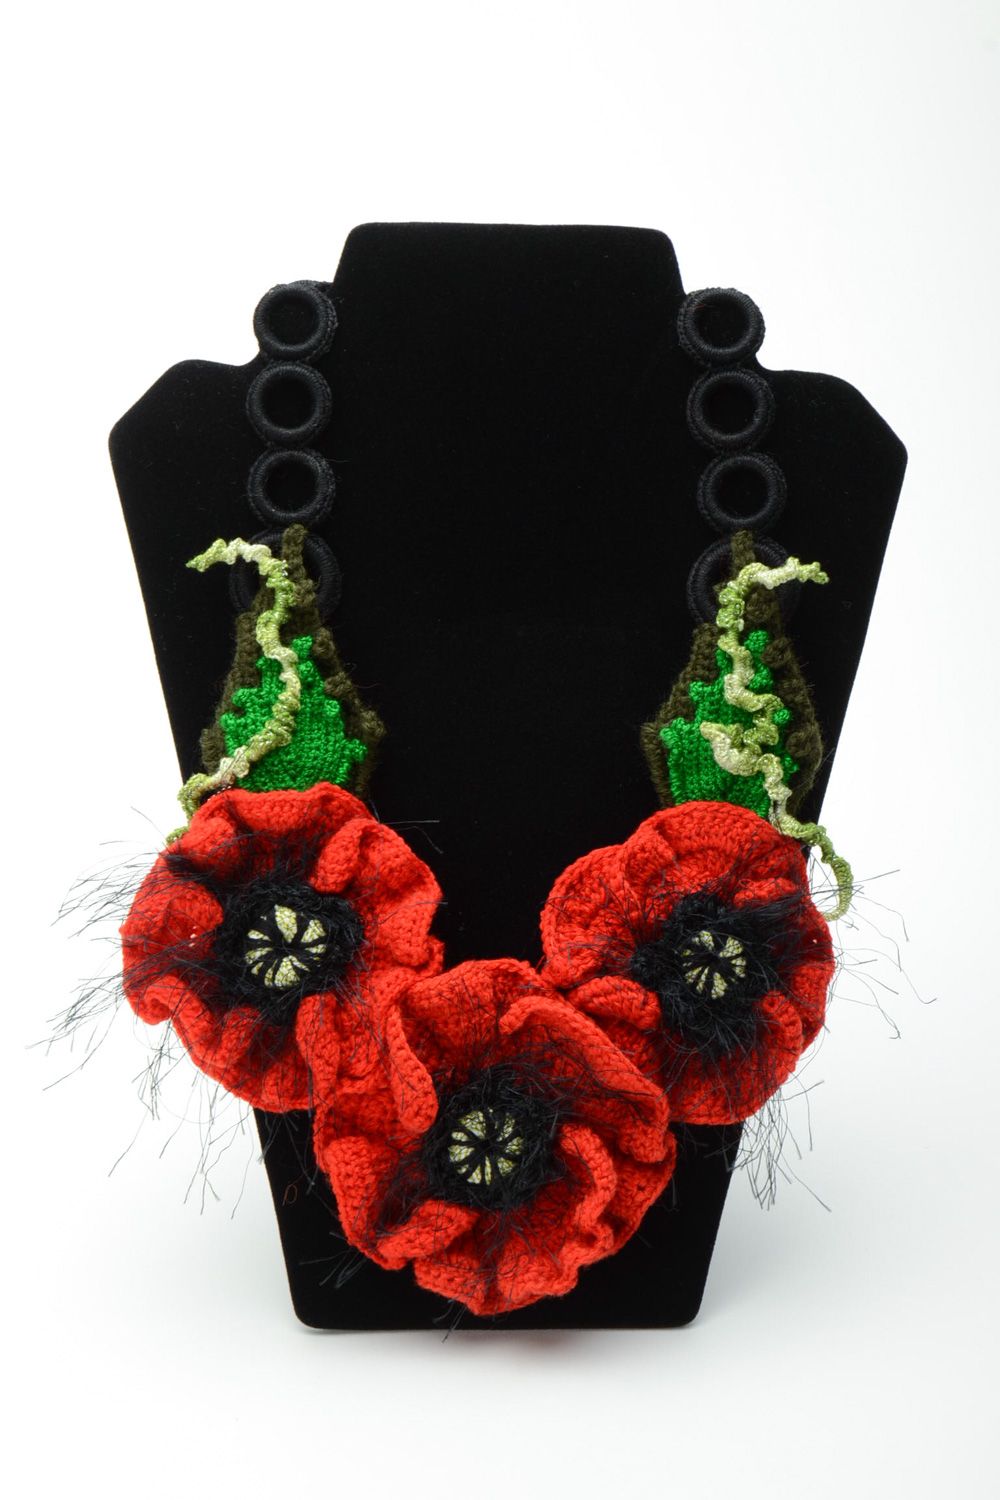 Homemade crochet flower necklace with beads Poppies photo 1